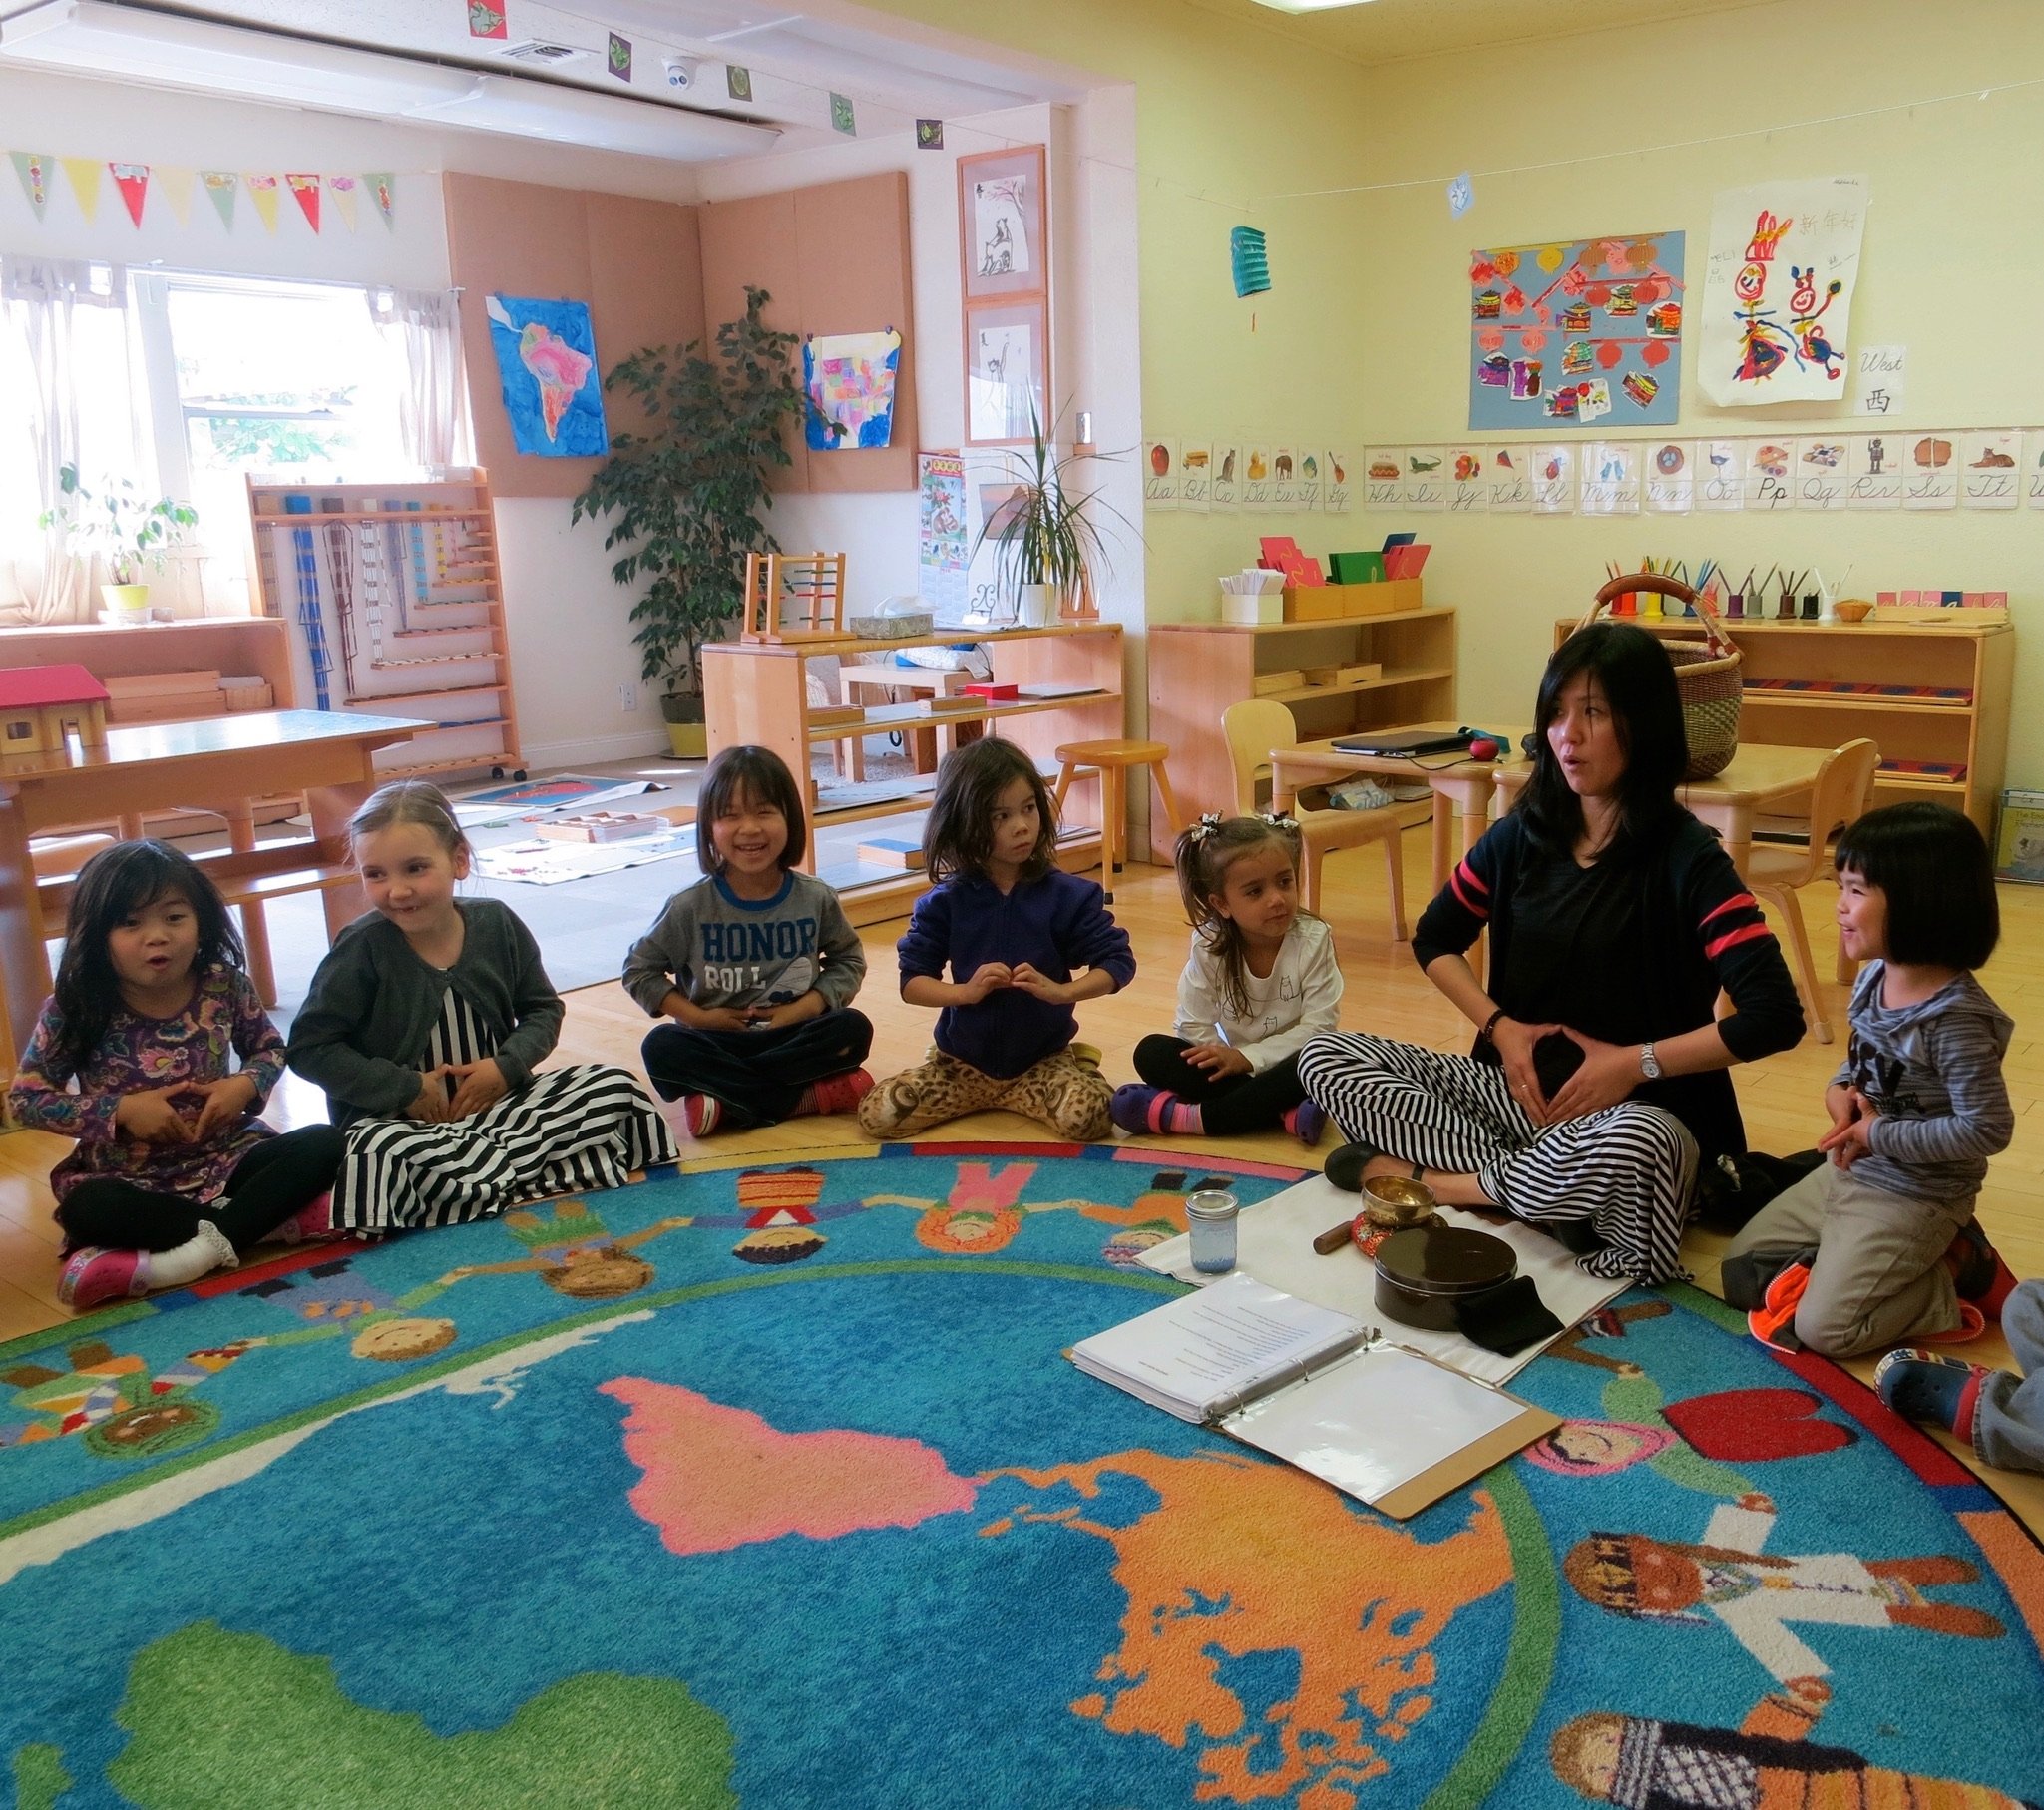 In-person weekly classes for children in a school setting